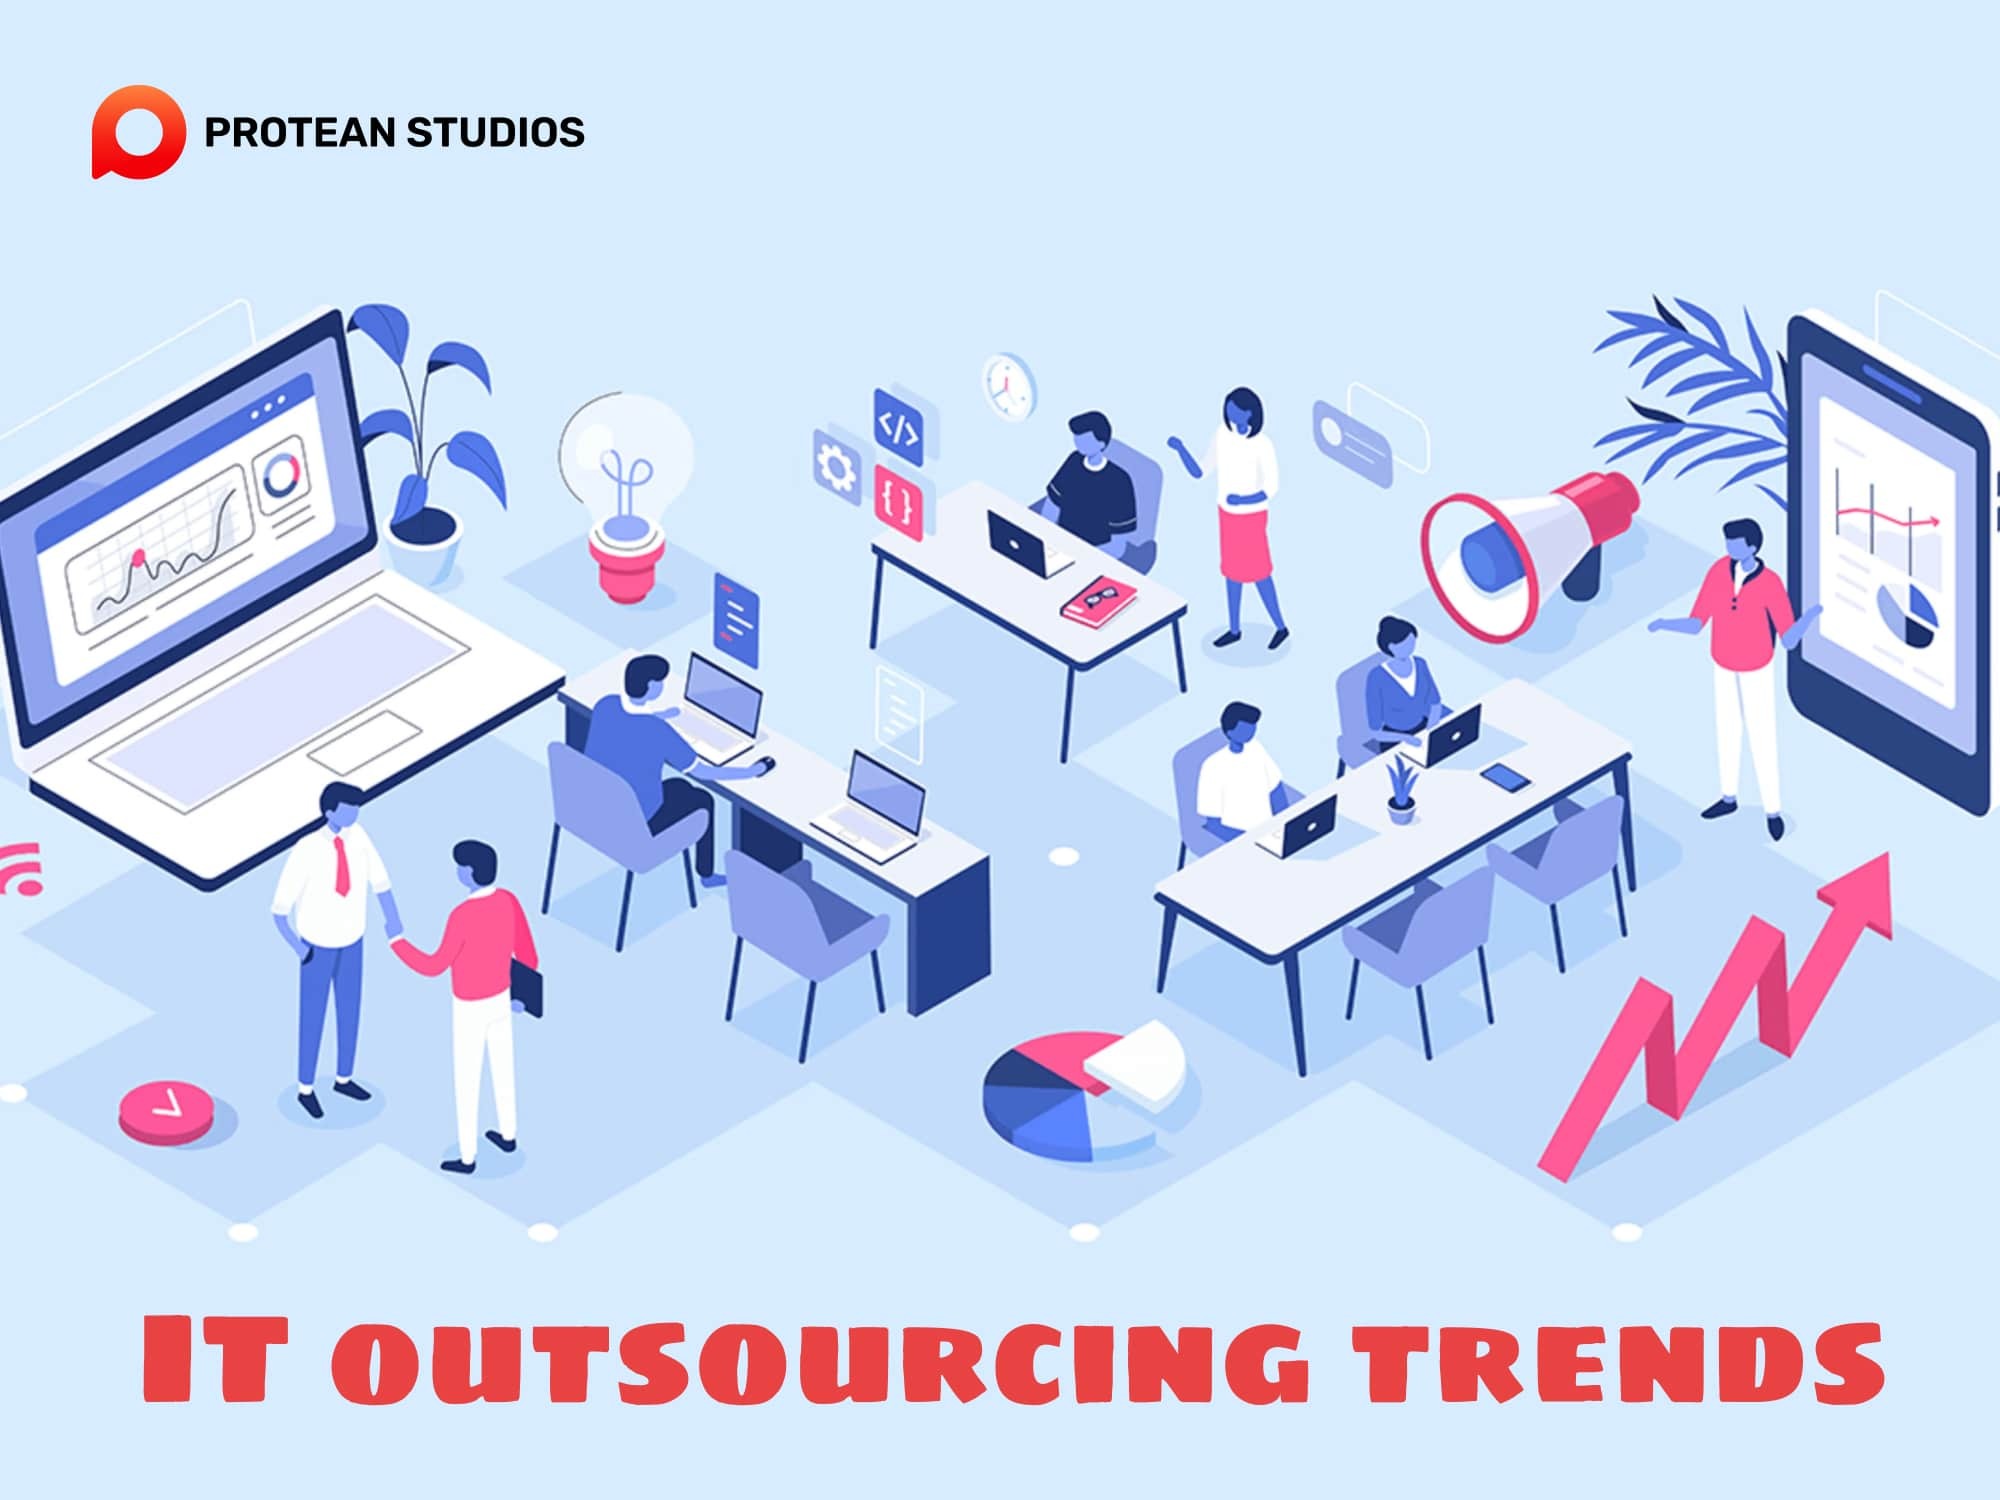 The overview of IT outsourcing nowadays